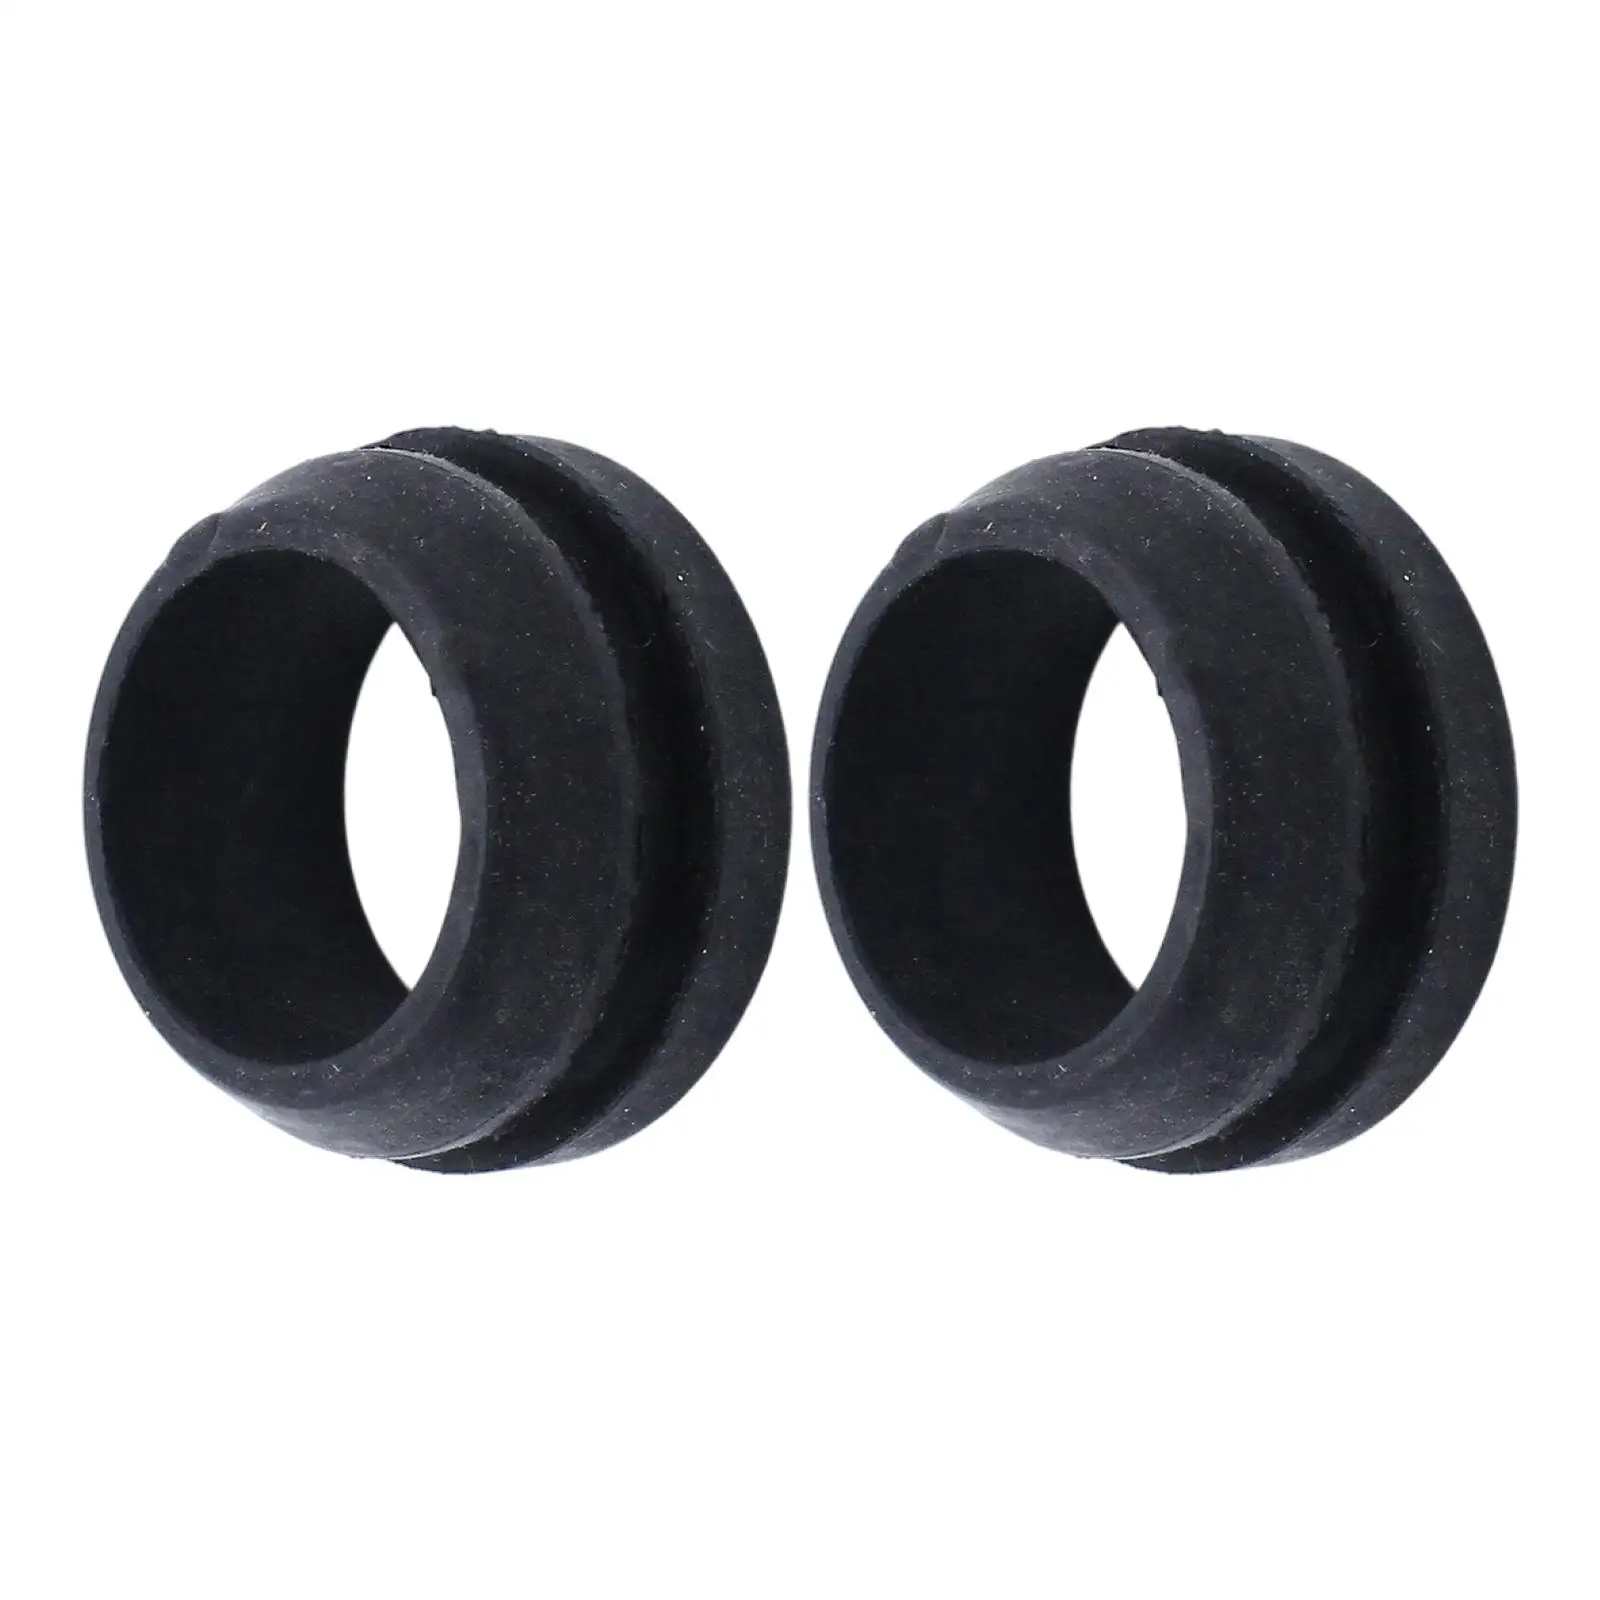 2x High Temp Rubber Breather Grommets Fit for Metal Cover 4880/4998 1/4